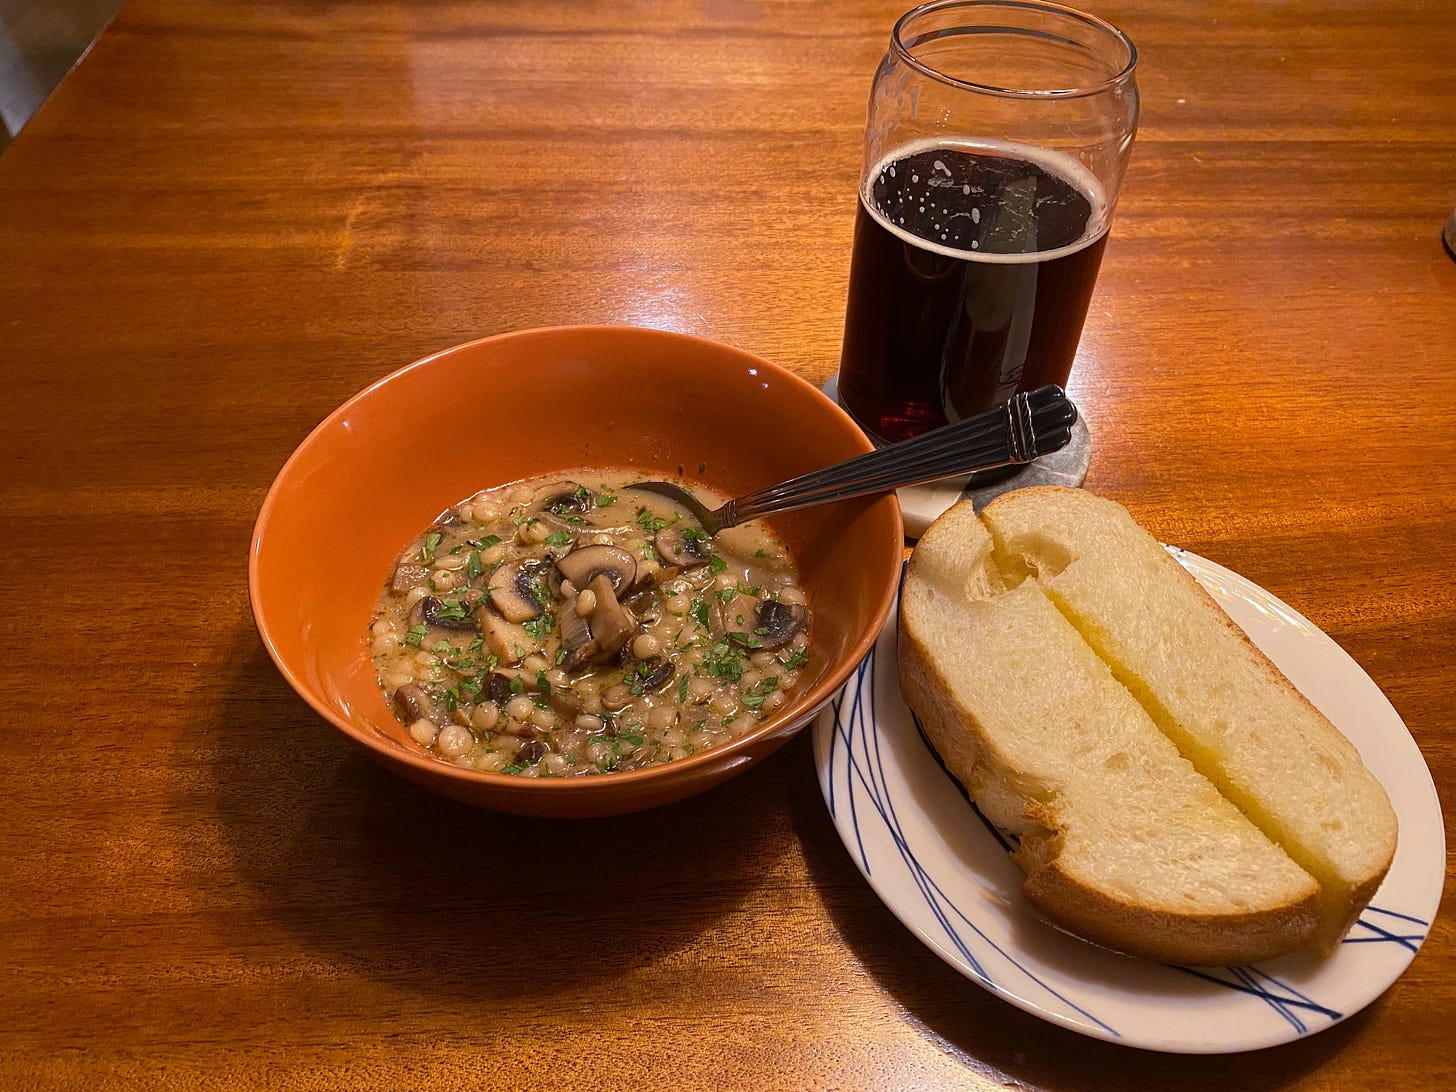 An orange bowl of the soup described above, with parsley sprinkled over the top and a spoon resting at the edge. Next to it is a white and blue plate with a slice of garlic bread on it, cut in half crosswise. Above it is a mostly-full glass of dark beer.